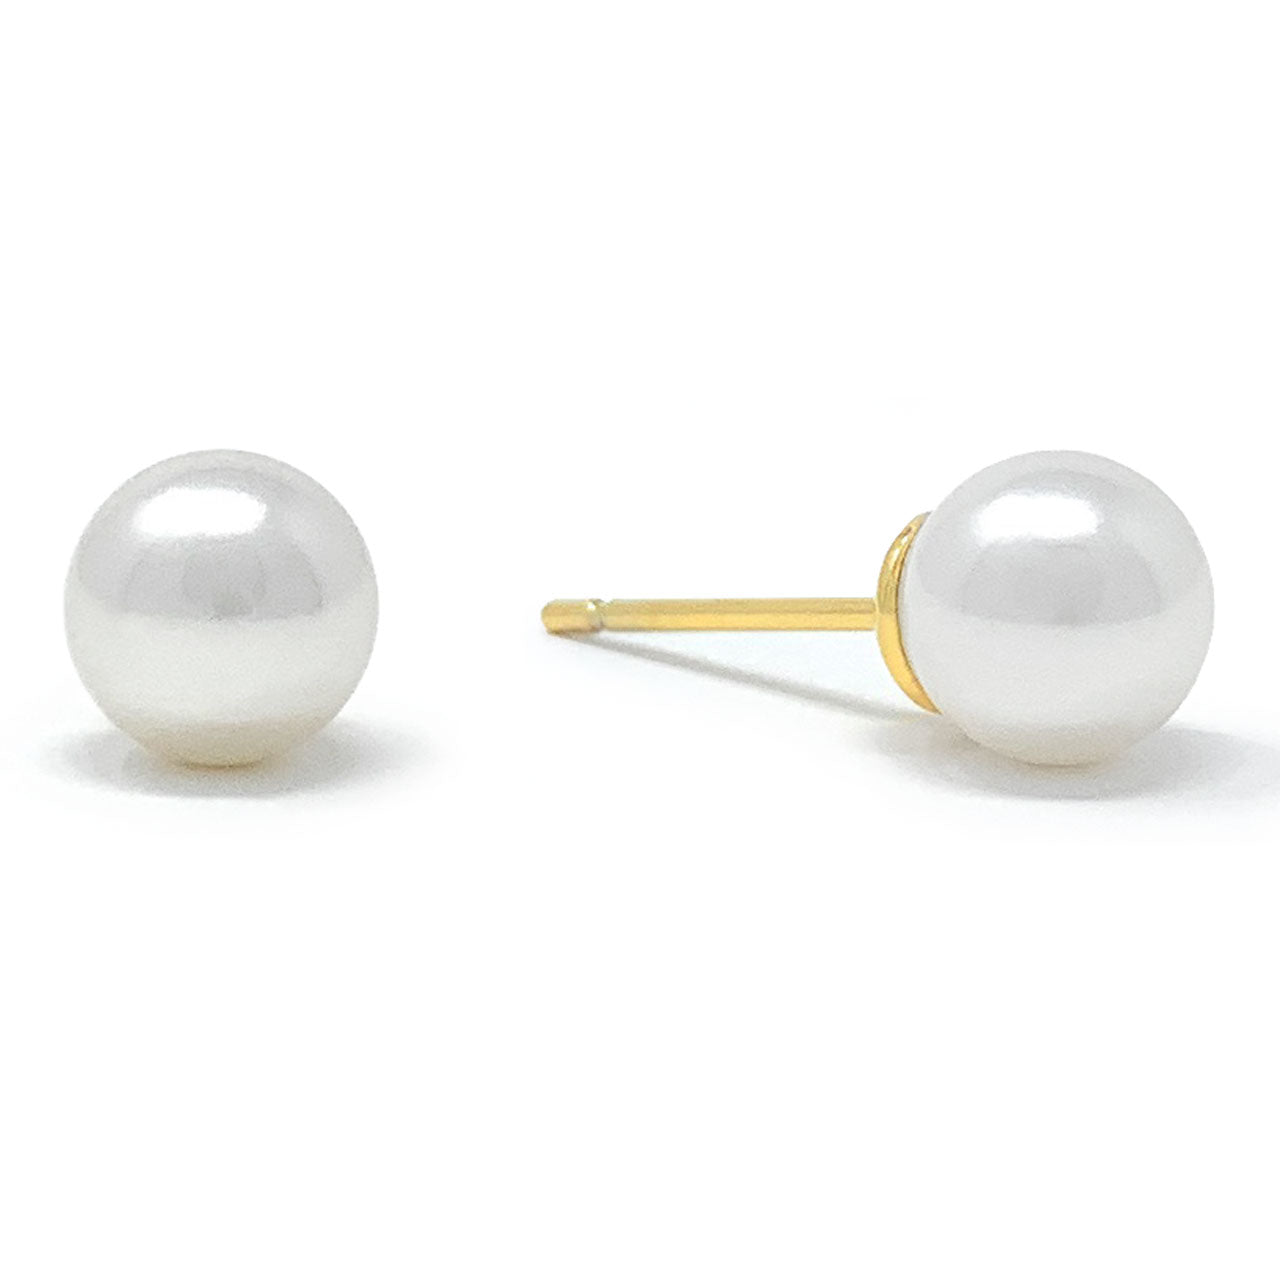 Elizabeth Small Stud Earrings with Ivory White Round Pearls from Swarovski Gold Plated - Ed Heart